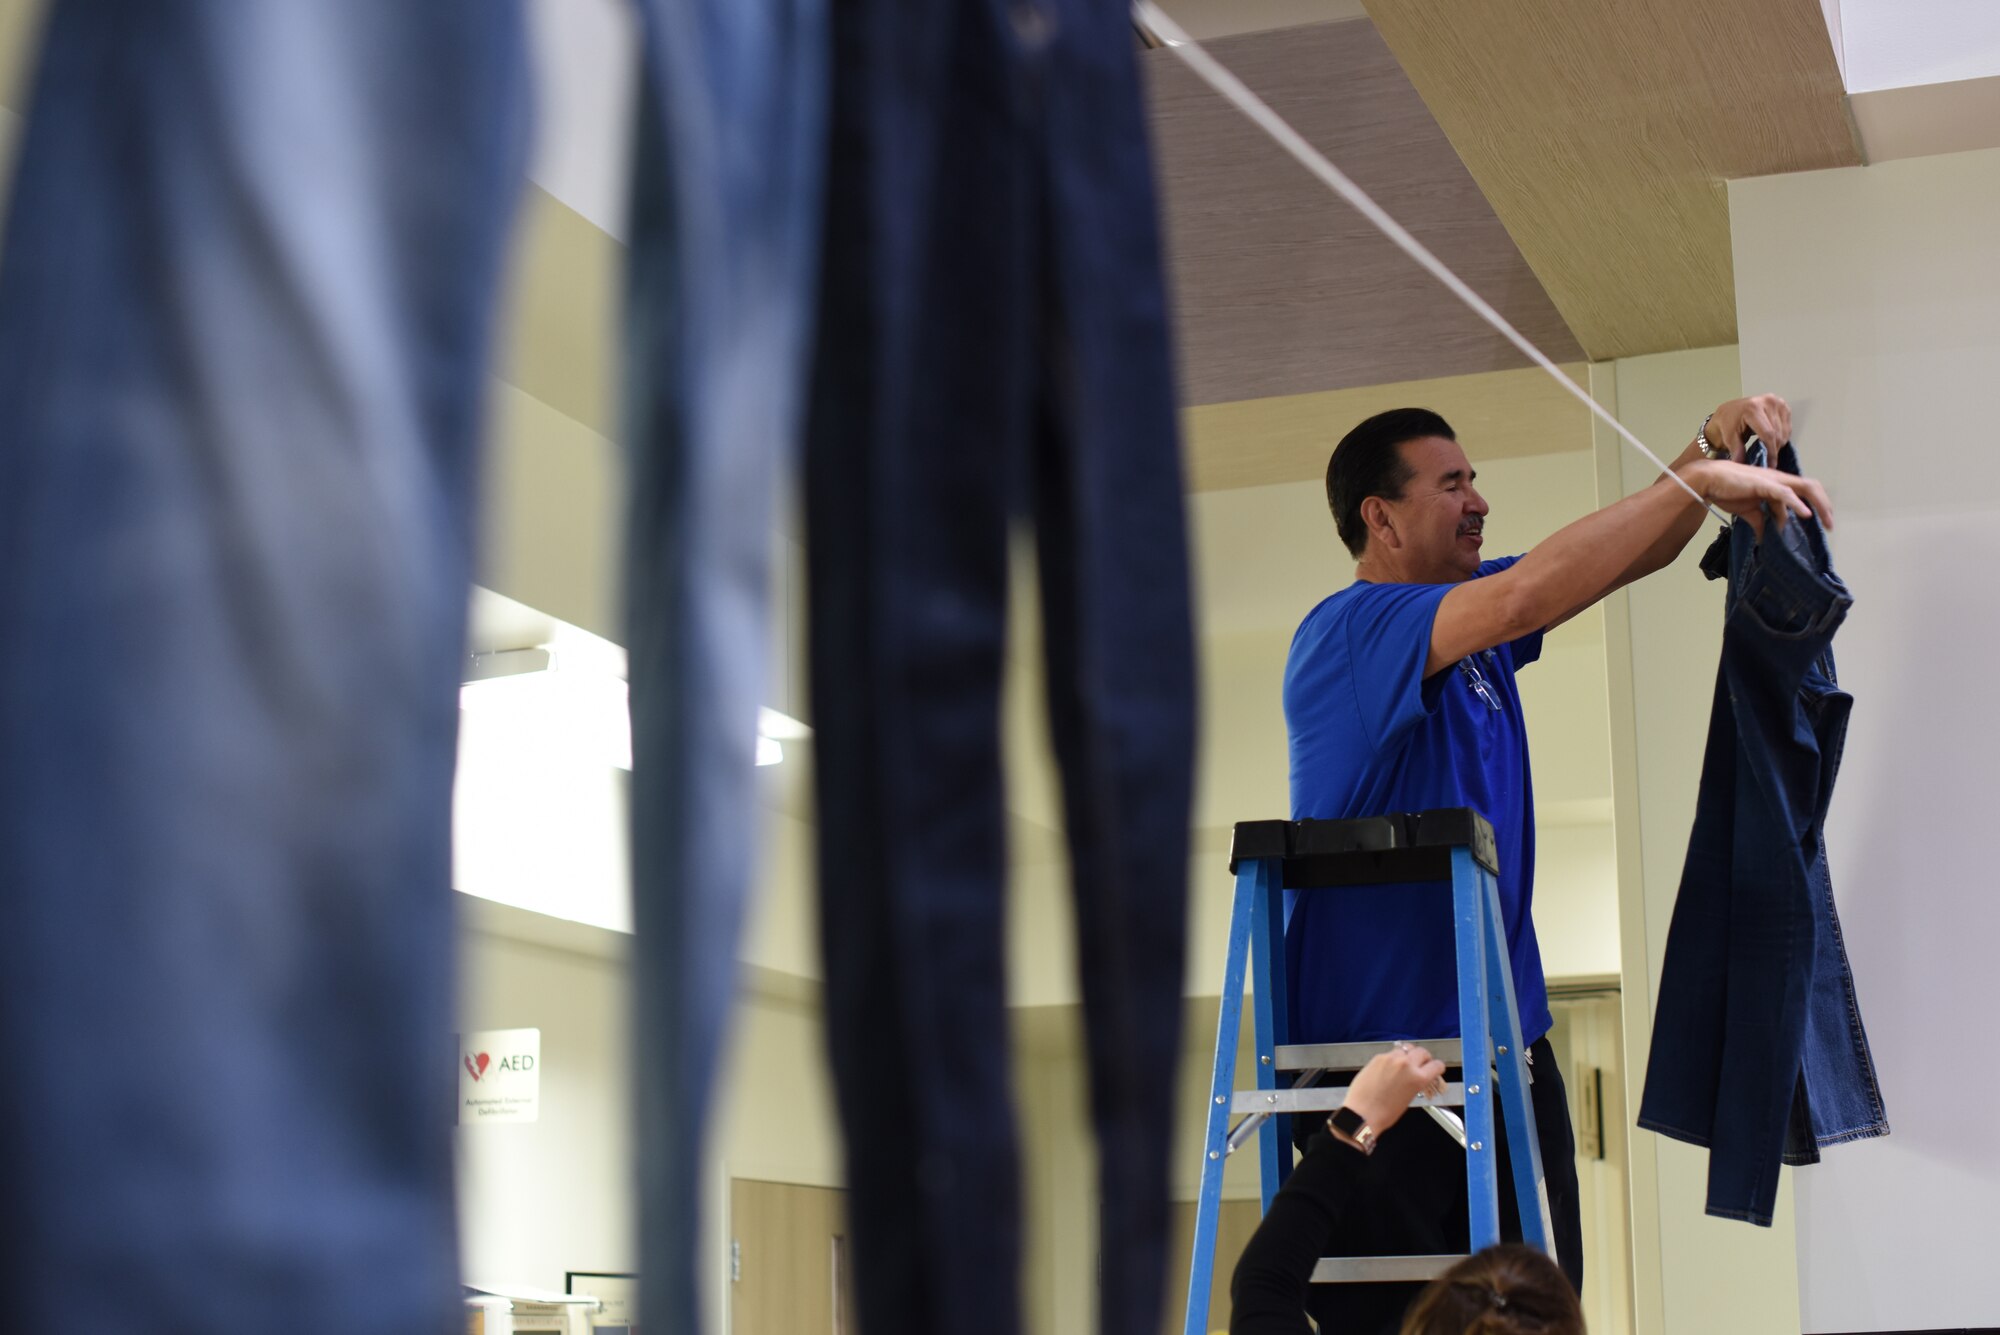 Alfonso Padilla, 377th Medical Group facilities, hangs jeans at the 377th MDG April 8, 2019. Over 40 pairs of jeans were hung up around Kirtland Air Force Base to raise awareness for sexual assault prevention month, and to celebrate Denim Day. (U.S. Air Force photo by Senior Airman Eli Chevalier)